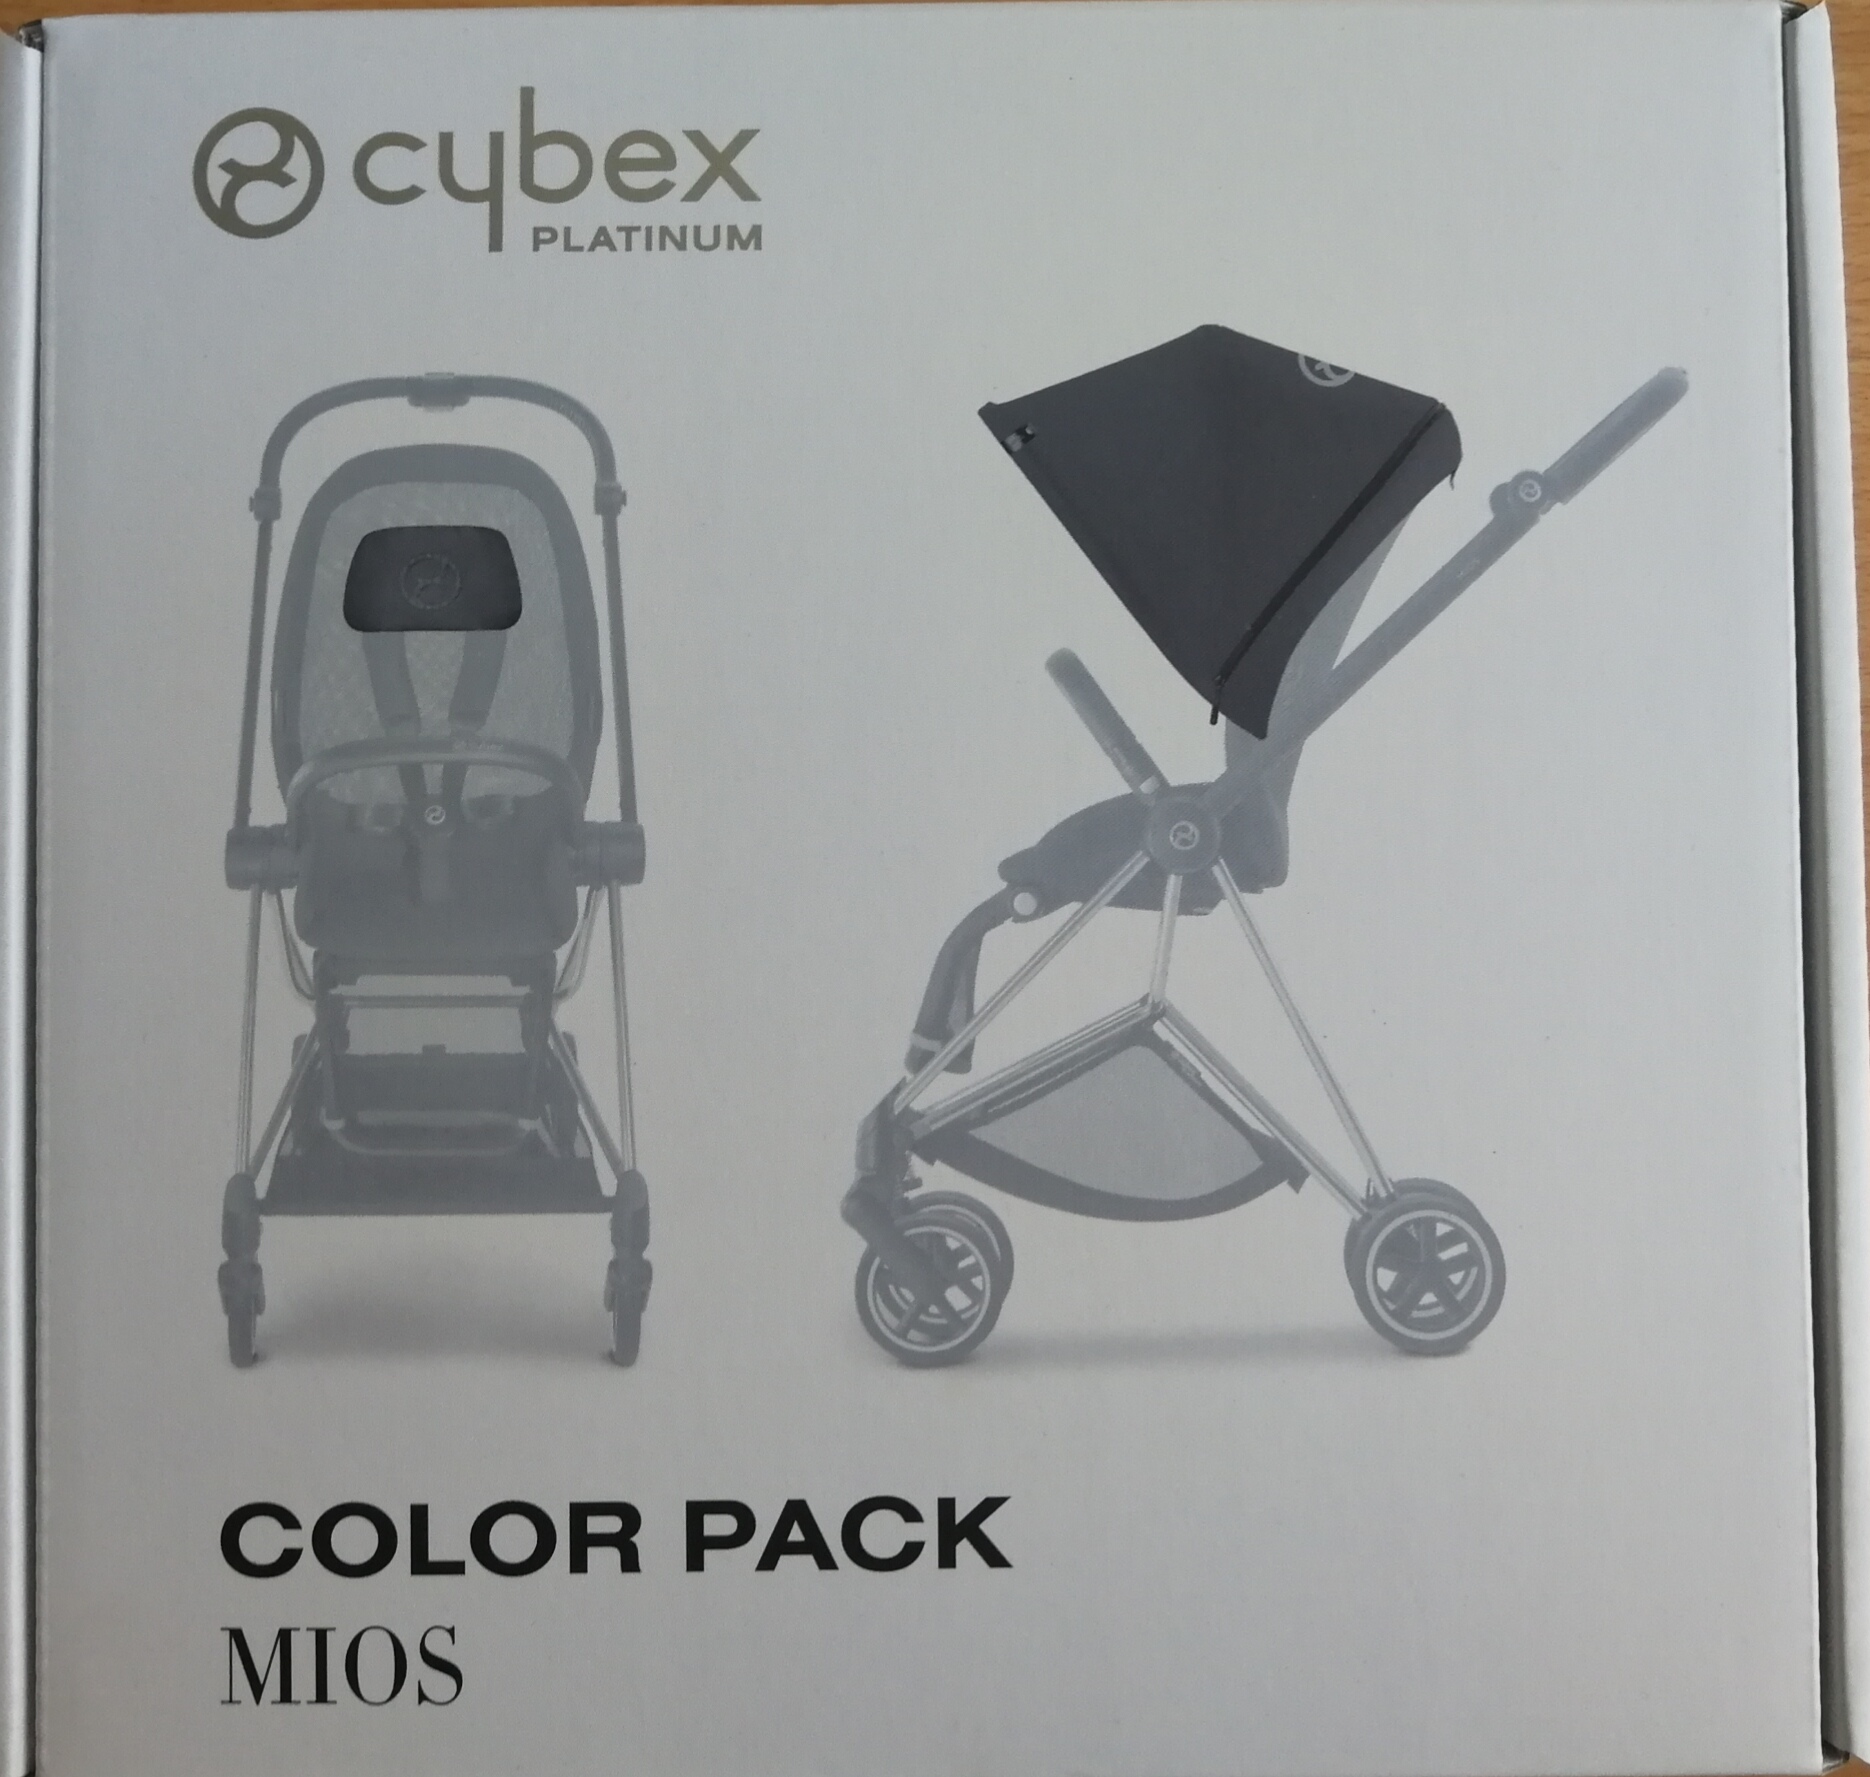 cybex color pack